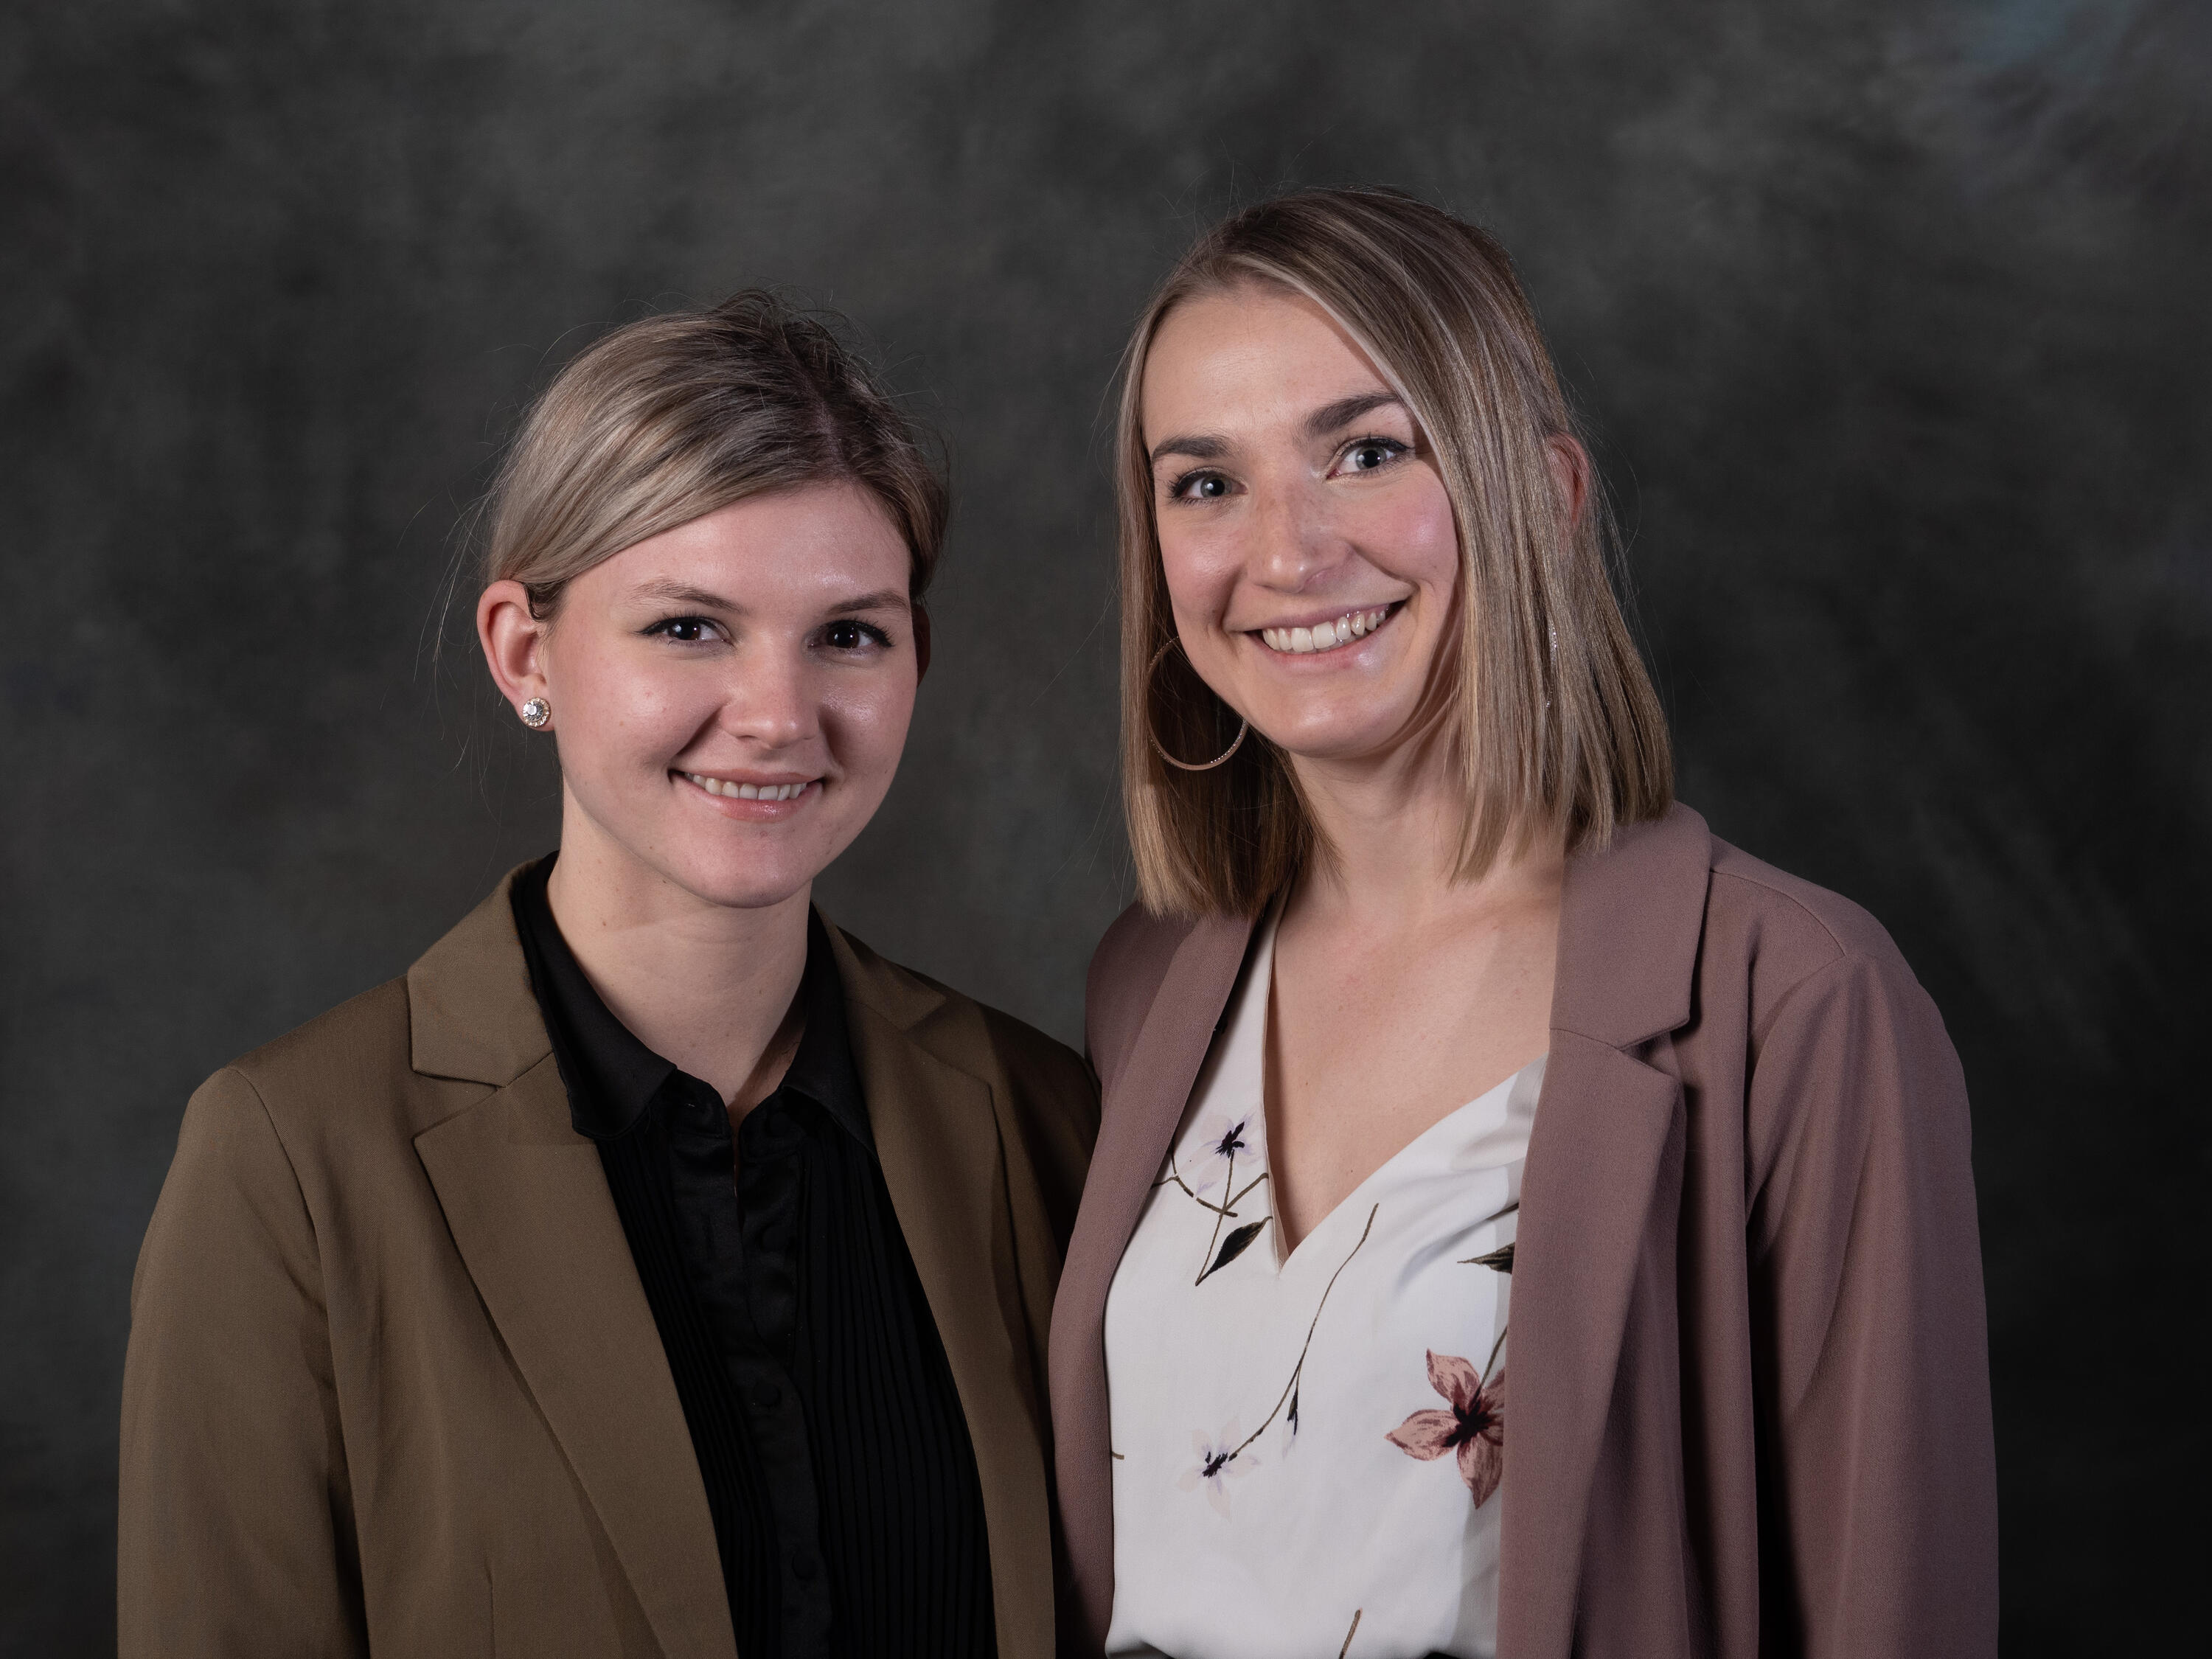 Kayli Dale and Jacquie Hutchings (BASc '20), Co-Founders of Friendlier